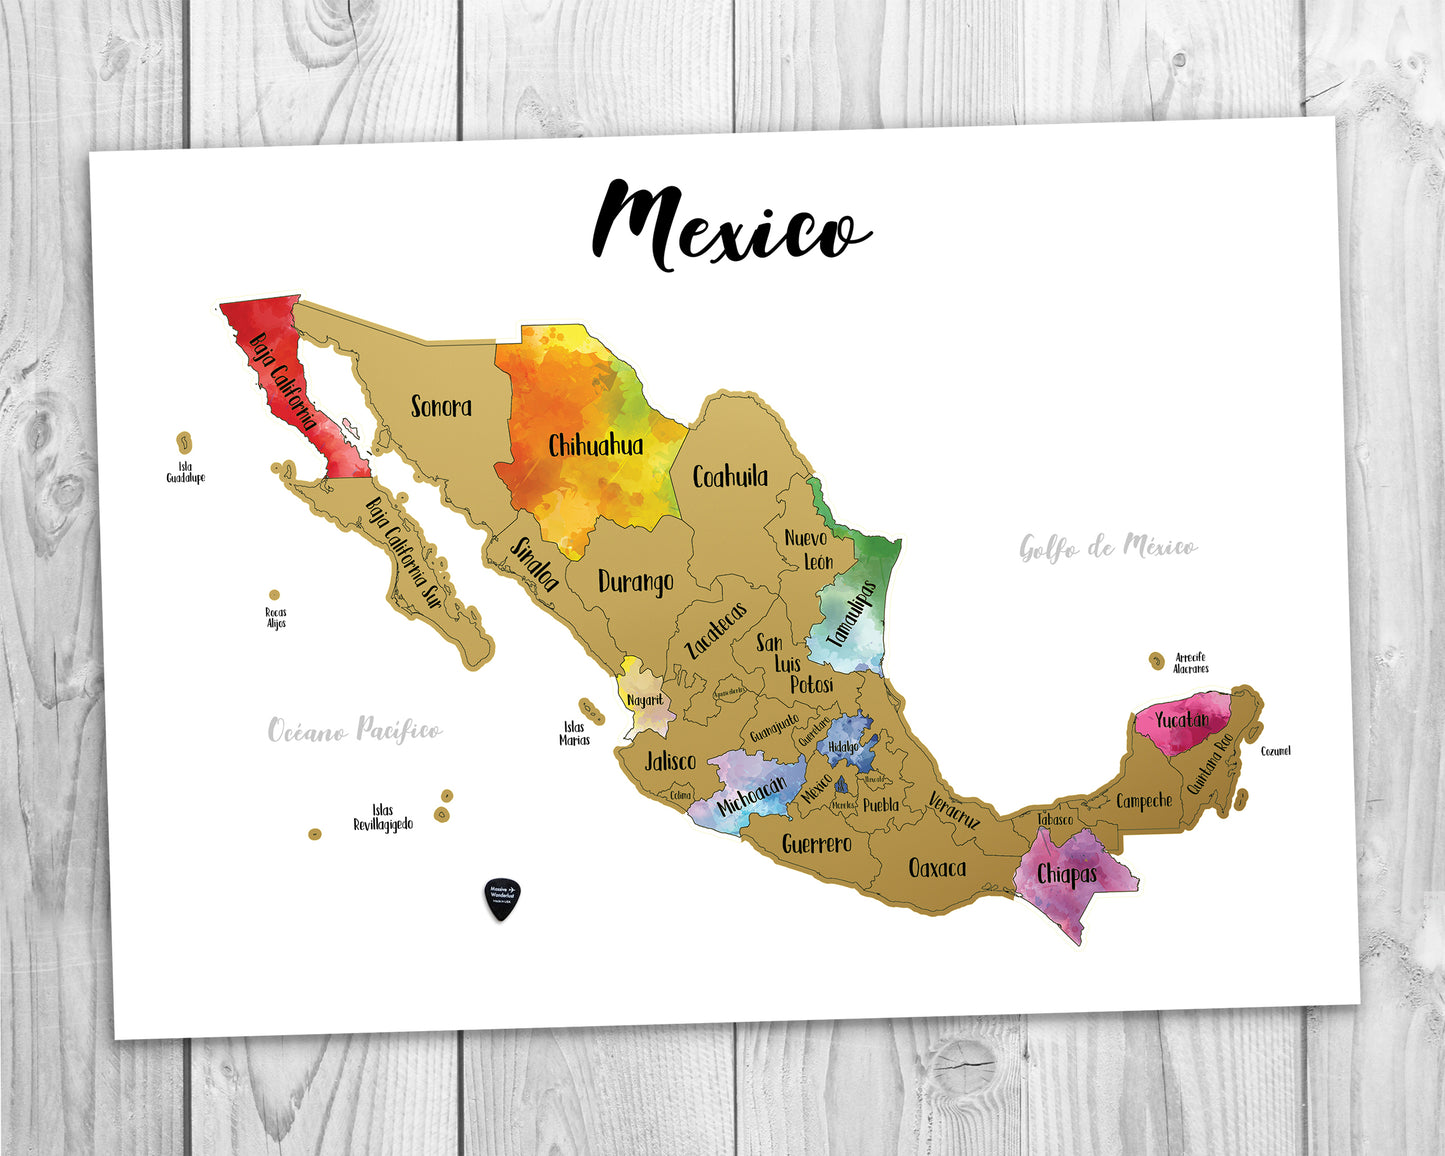 Gold - Mexico Scratch-Off Map - Size 23.5x17"